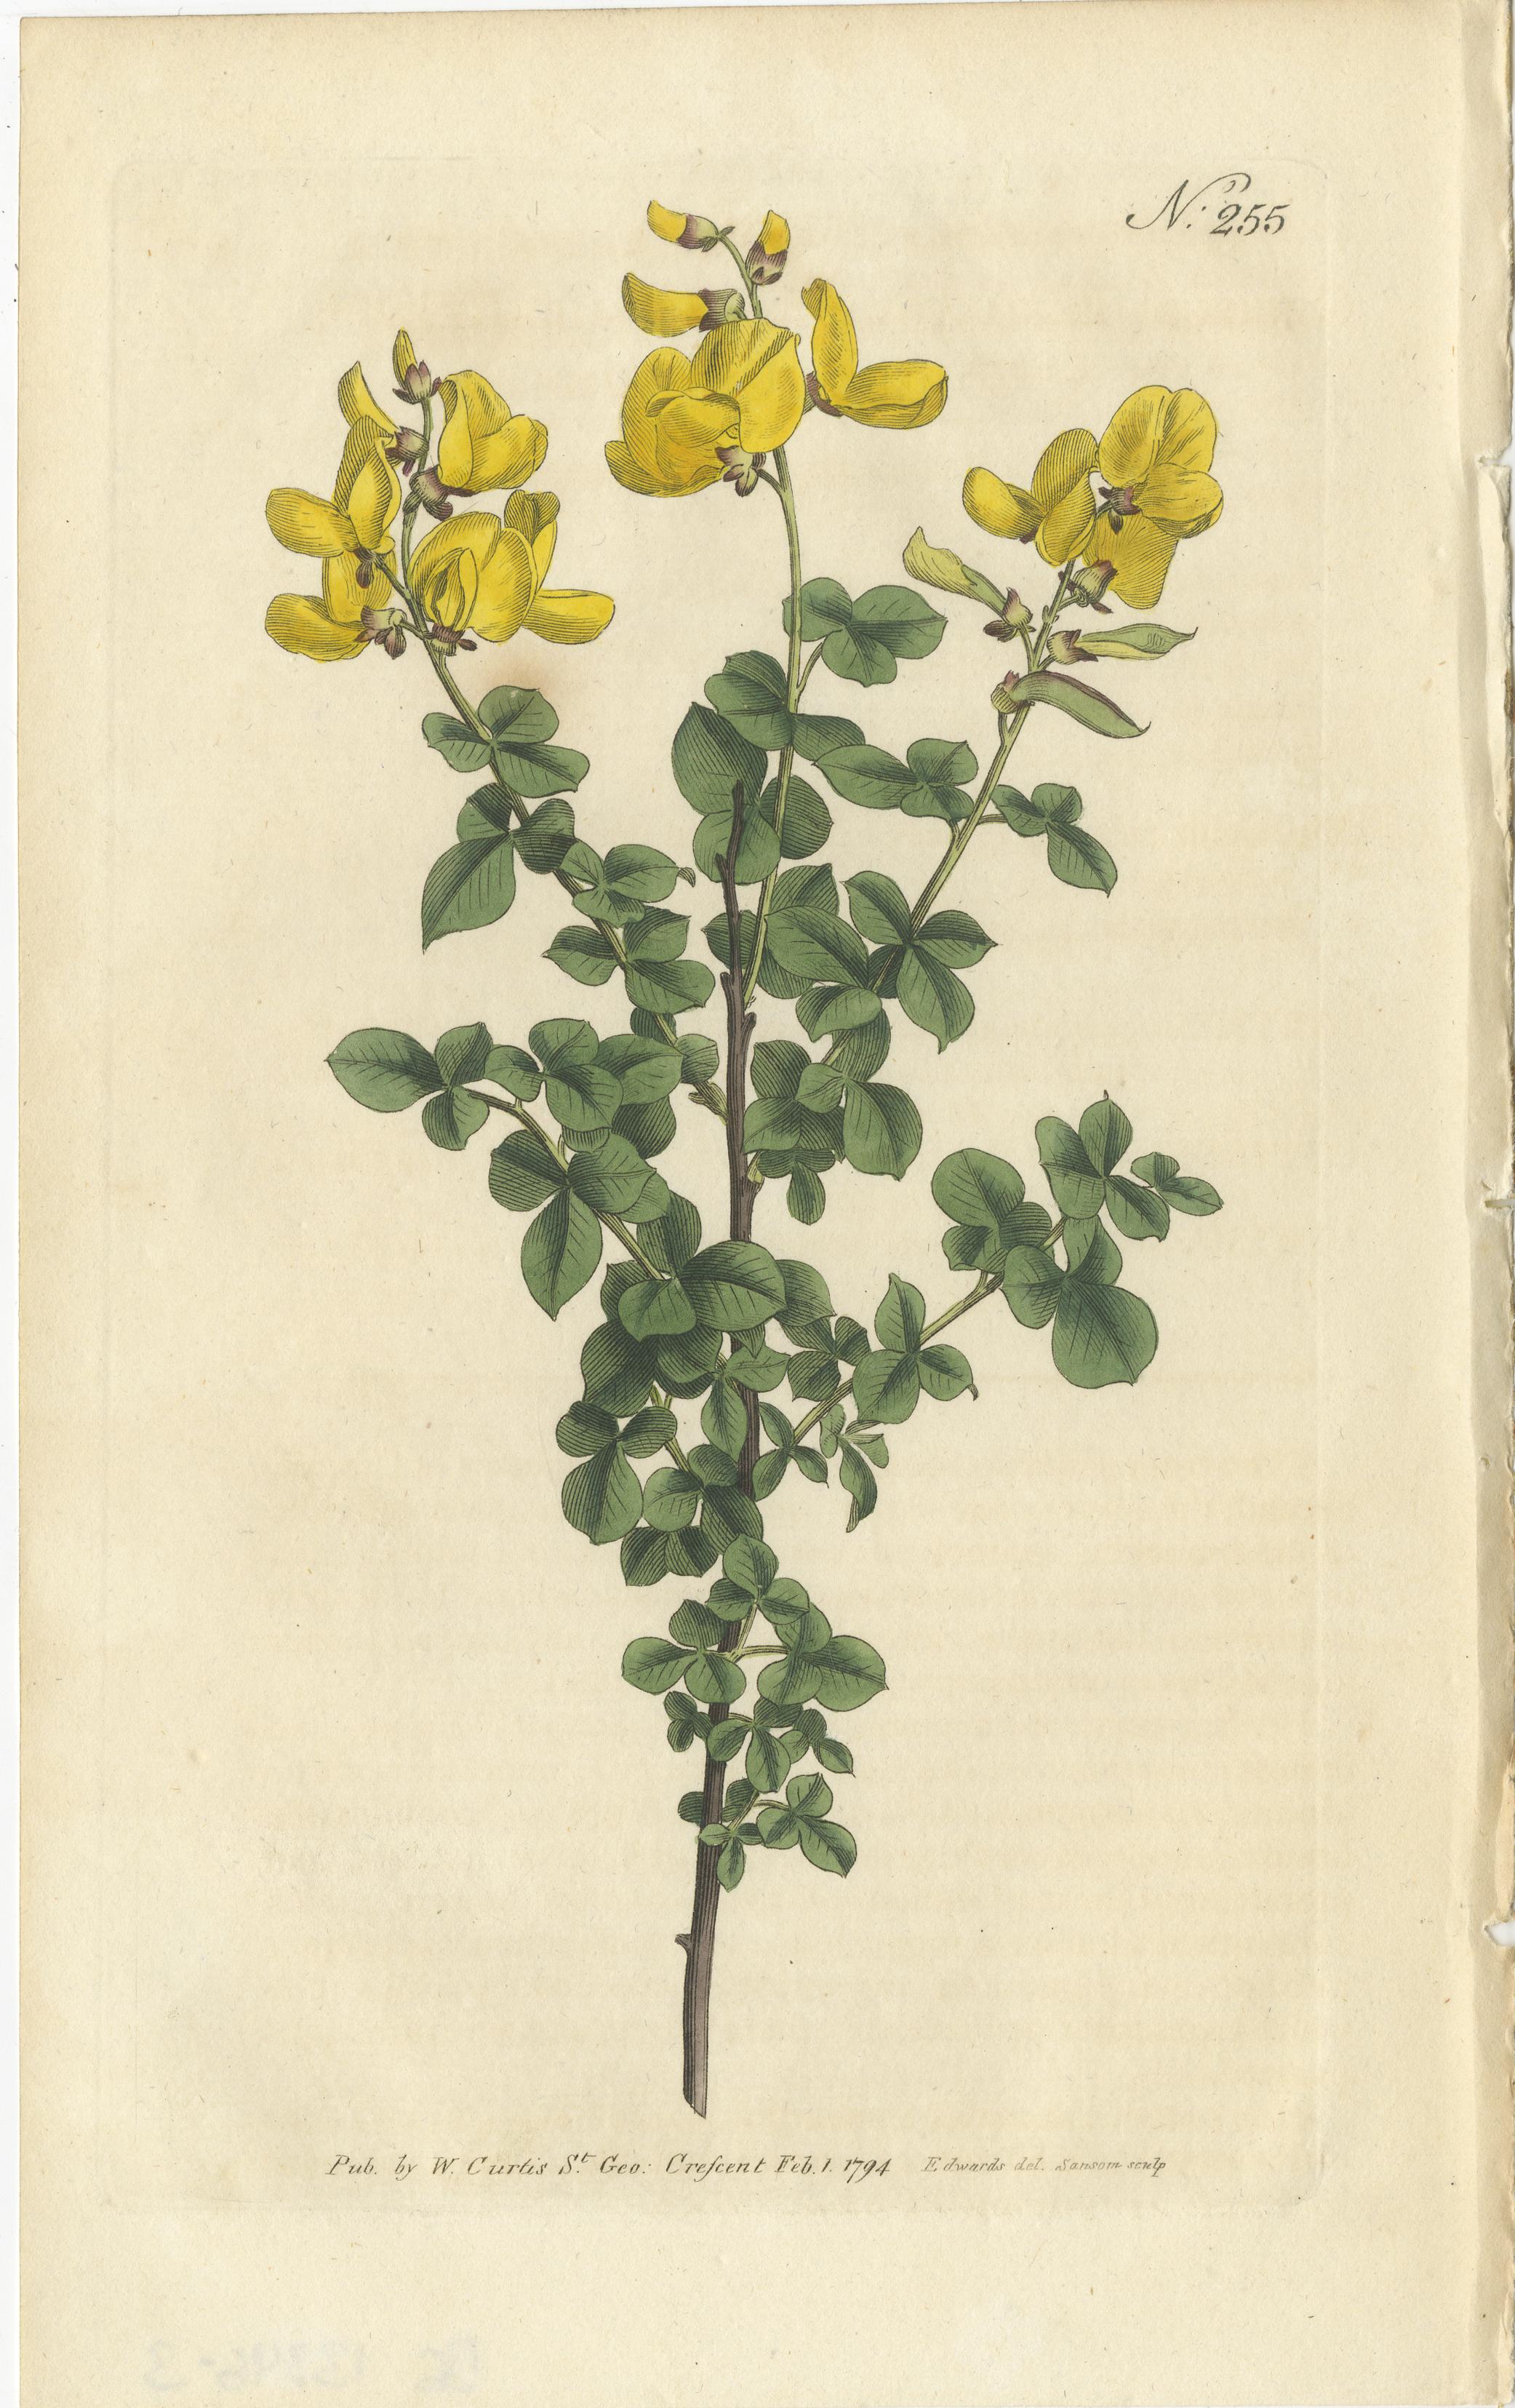 Set of 3 antique botany prints. It shows the Sessile-Leaved or Common Cytisus, Heart-Leaved Borbonia and the Beautoful Cistus. These prints originate from 'The Botanical Magazine; or Flower-Garden Displayed (..)' by William Curtis. Published 1794.